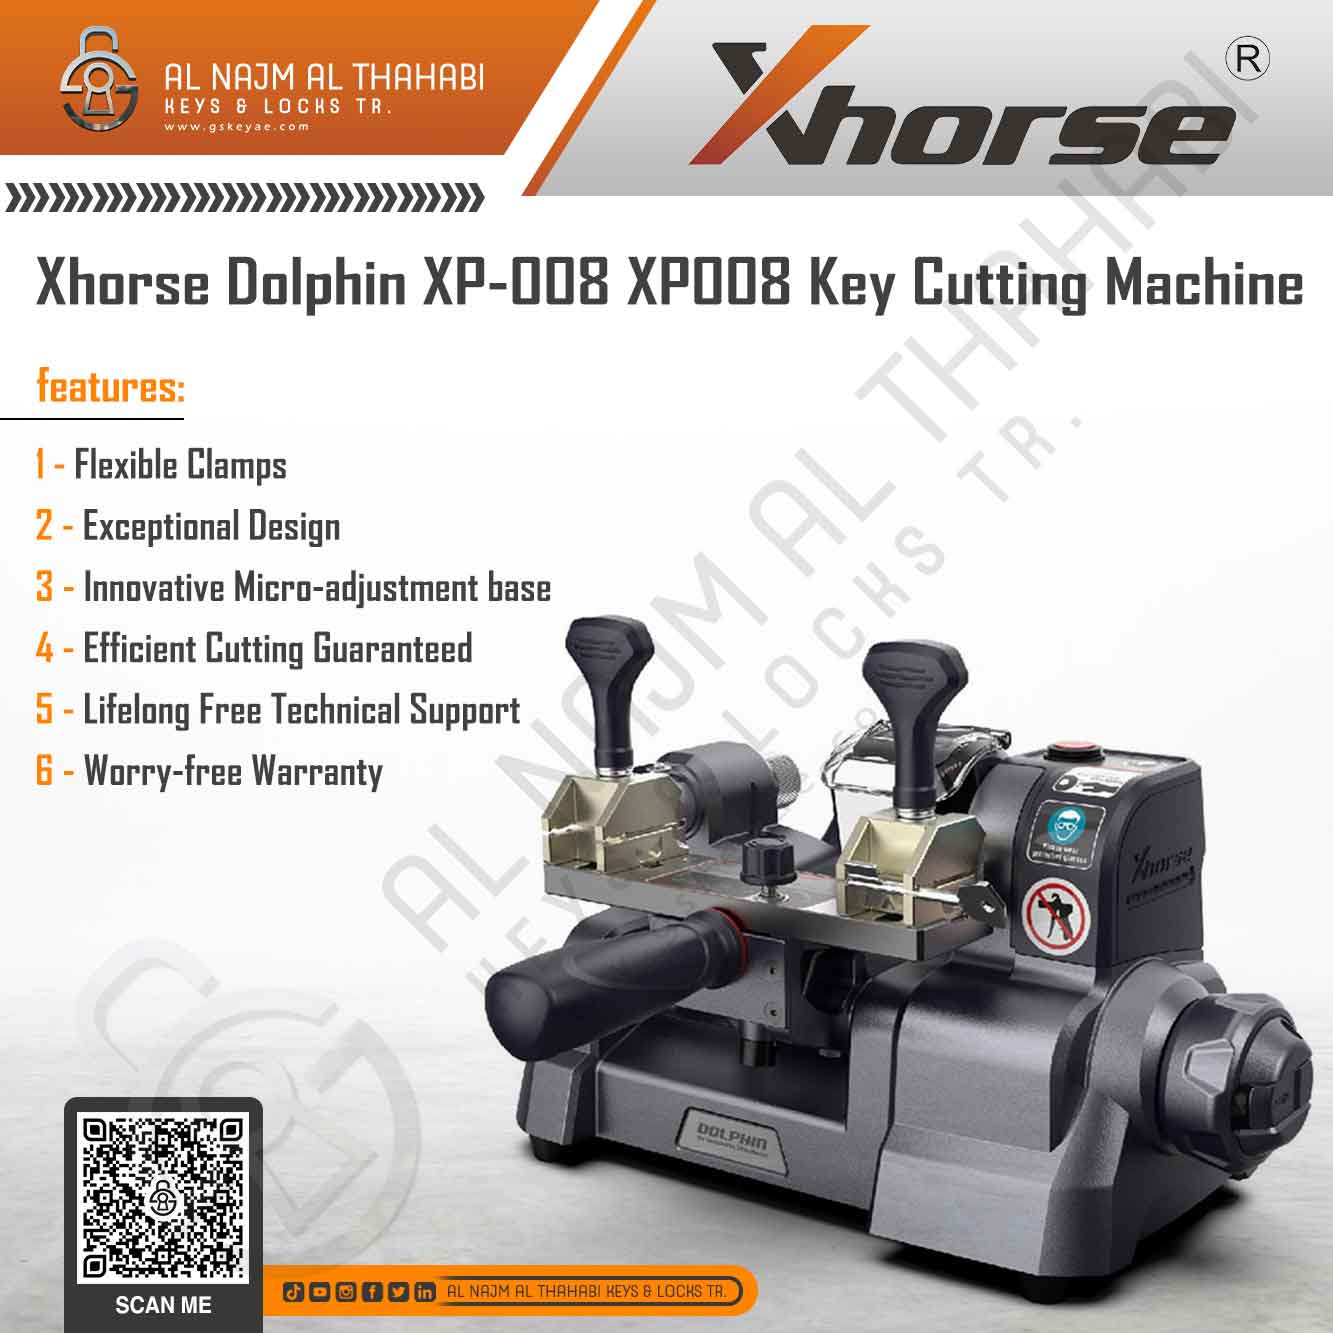 Xhorse Dolphin XP-008 Key Cutting Machine Features 